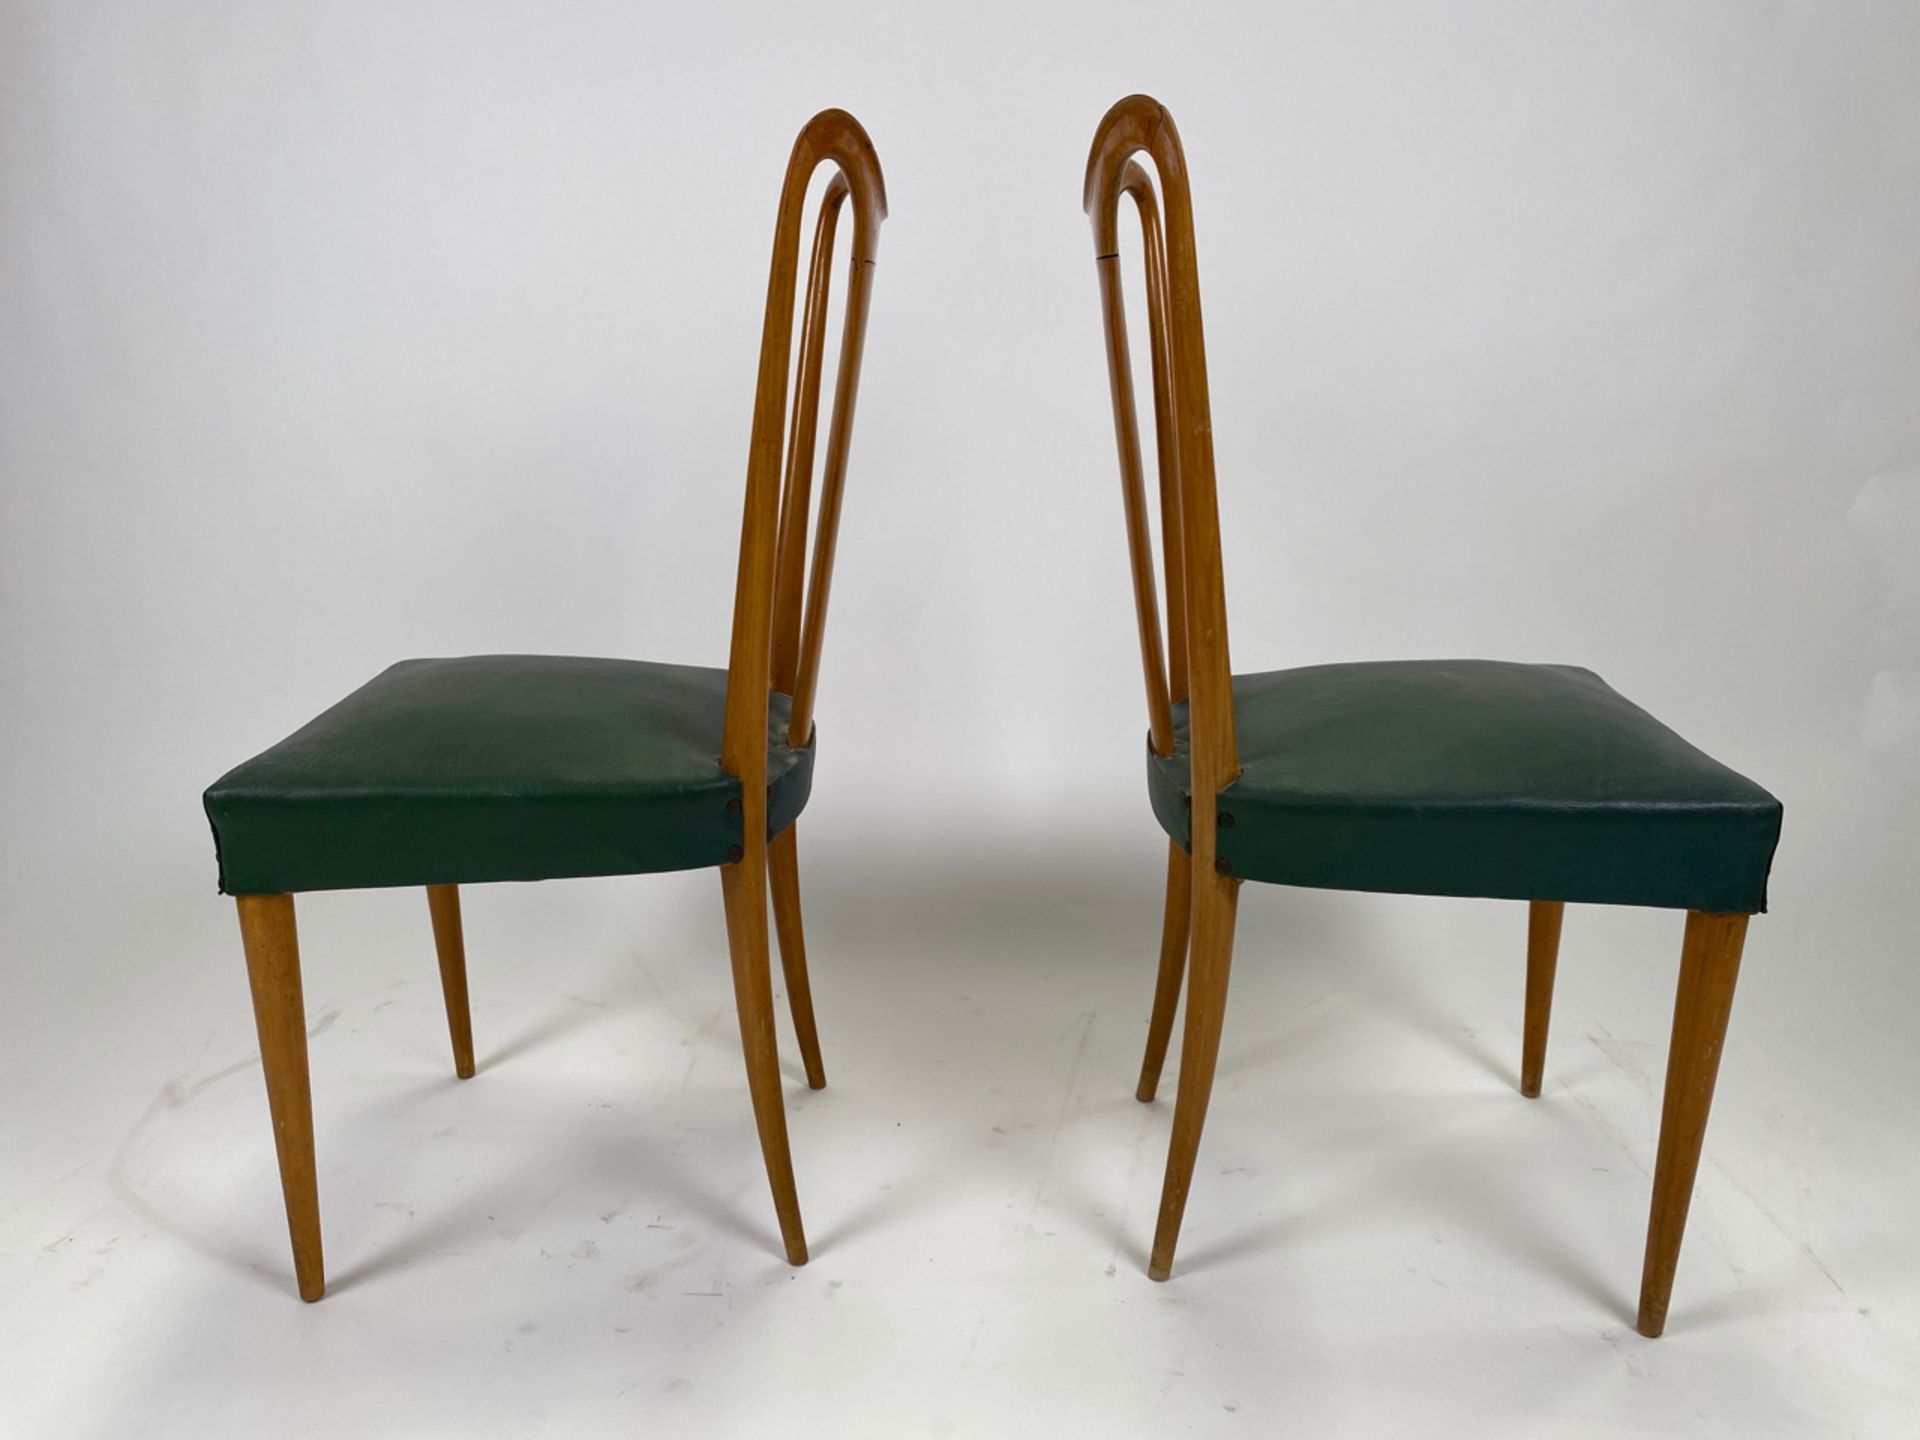 Pair of Ico Parisi Mid-Century Leather Chairs - Image 5 of 8